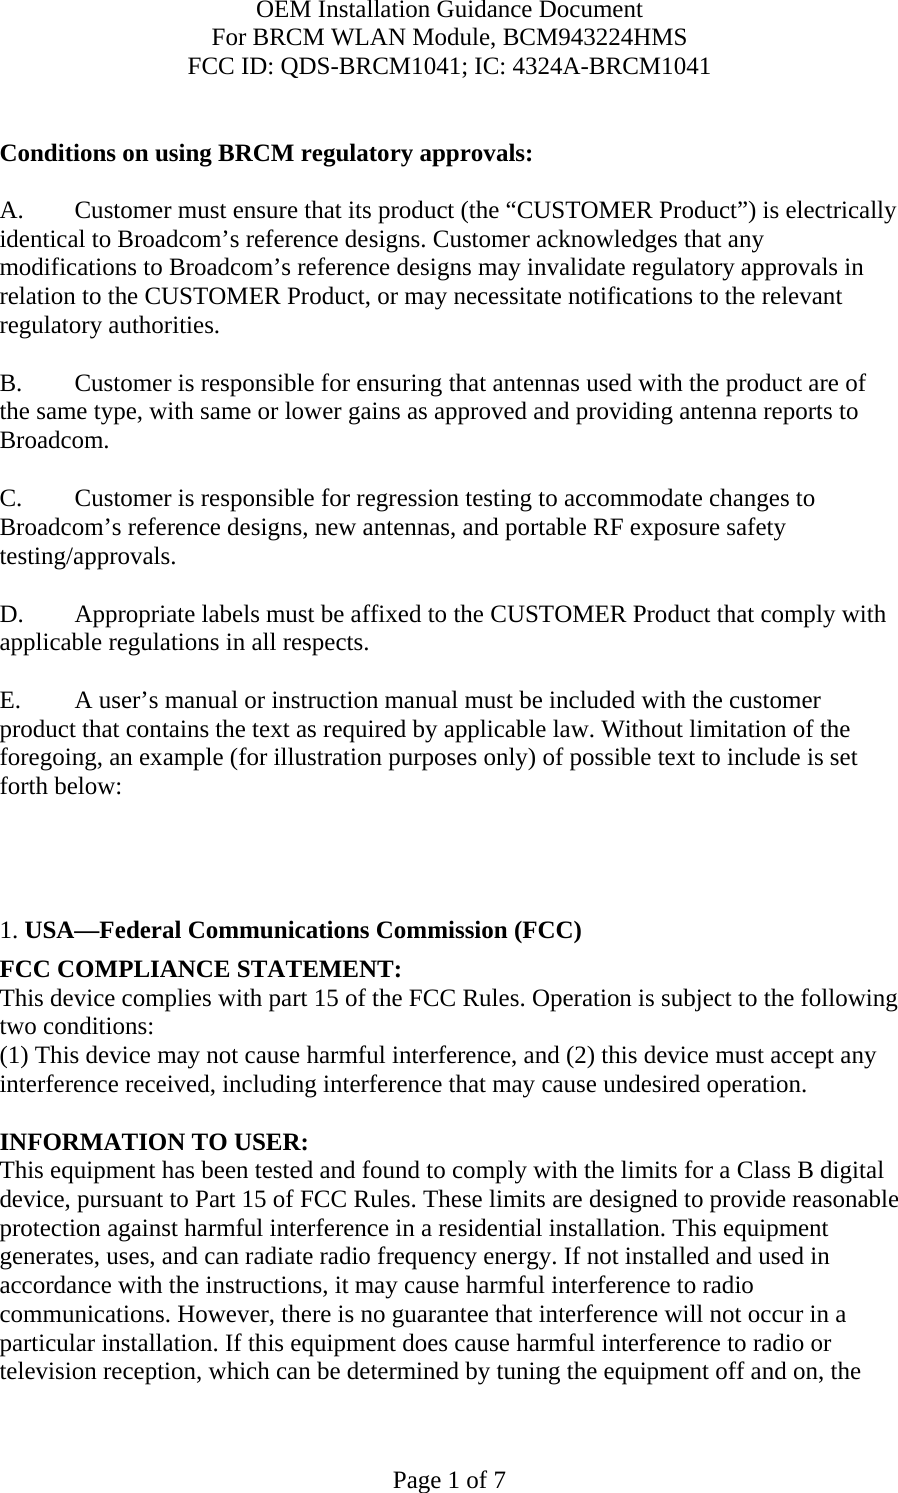 OEM Installation Guidance Document For BRCM WLAN Module, BCM943224HMS FCC ID: QDS-BRCM1041; IC: 4324A-BRCM1041  Page 1 of 7  Conditions on using BRCM regulatory approvals:   A.  Customer must ensure that its product (the “CUSTOMER Product”) is electrically identical to Broadcom’s reference designs. Customer acknowledges that any modifications to Broadcom’s reference designs may invalidate regulatory approvals in relation to the CUSTOMER Product, or may necessitate notifications to the relevant regulatory authorities.  B.   Customer is responsible for ensuring that antennas used with the product are of the same type, with same or lower gains as approved and providing antenna reports to Broadcom.  C.   Customer is responsible for regression testing to accommodate changes to Broadcom’s reference designs, new antennas, and portable RF exposure safety testing/approvals.  D.  Appropriate labels must be affixed to the CUSTOMER Product that comply with applicable regulations in all respects.    E.  A user’s manual or instruction manual must be included with the customer product that contains the text as required by applicable law. Without limitation of the foregoing, an example (for illustration purposes only) of possible text to include is set forth below:       1. USA—Federal Communications Commission (FCC) FCC COMPLIANCE STATEMENT: This device complies with part 15 of the FCC Rules. Operation is subject to the following two conditions: (1) This device may not cause harmful interference, and (2) this device must accept any interference received, including interference that may cause undesired operation.  INFORMATION TO USER: This equipment has been tested and found to comply with the limits for a Class B digital device, pursuant to Part 15 of FCC Rules. These limits are designed to provide reasonable protection against harmful interference in a residential installation. This equipment generates, uses, and can radiate radio frequency energy. If not installed and used in accordance with the instructions, it may cause harmful interference to radio communications. However, there is no guarantee that interference will not occur in a particular installation. If this equipment does cause harmful interference to radio or television reception, which can be determined by tuning the equipment off and on, the 